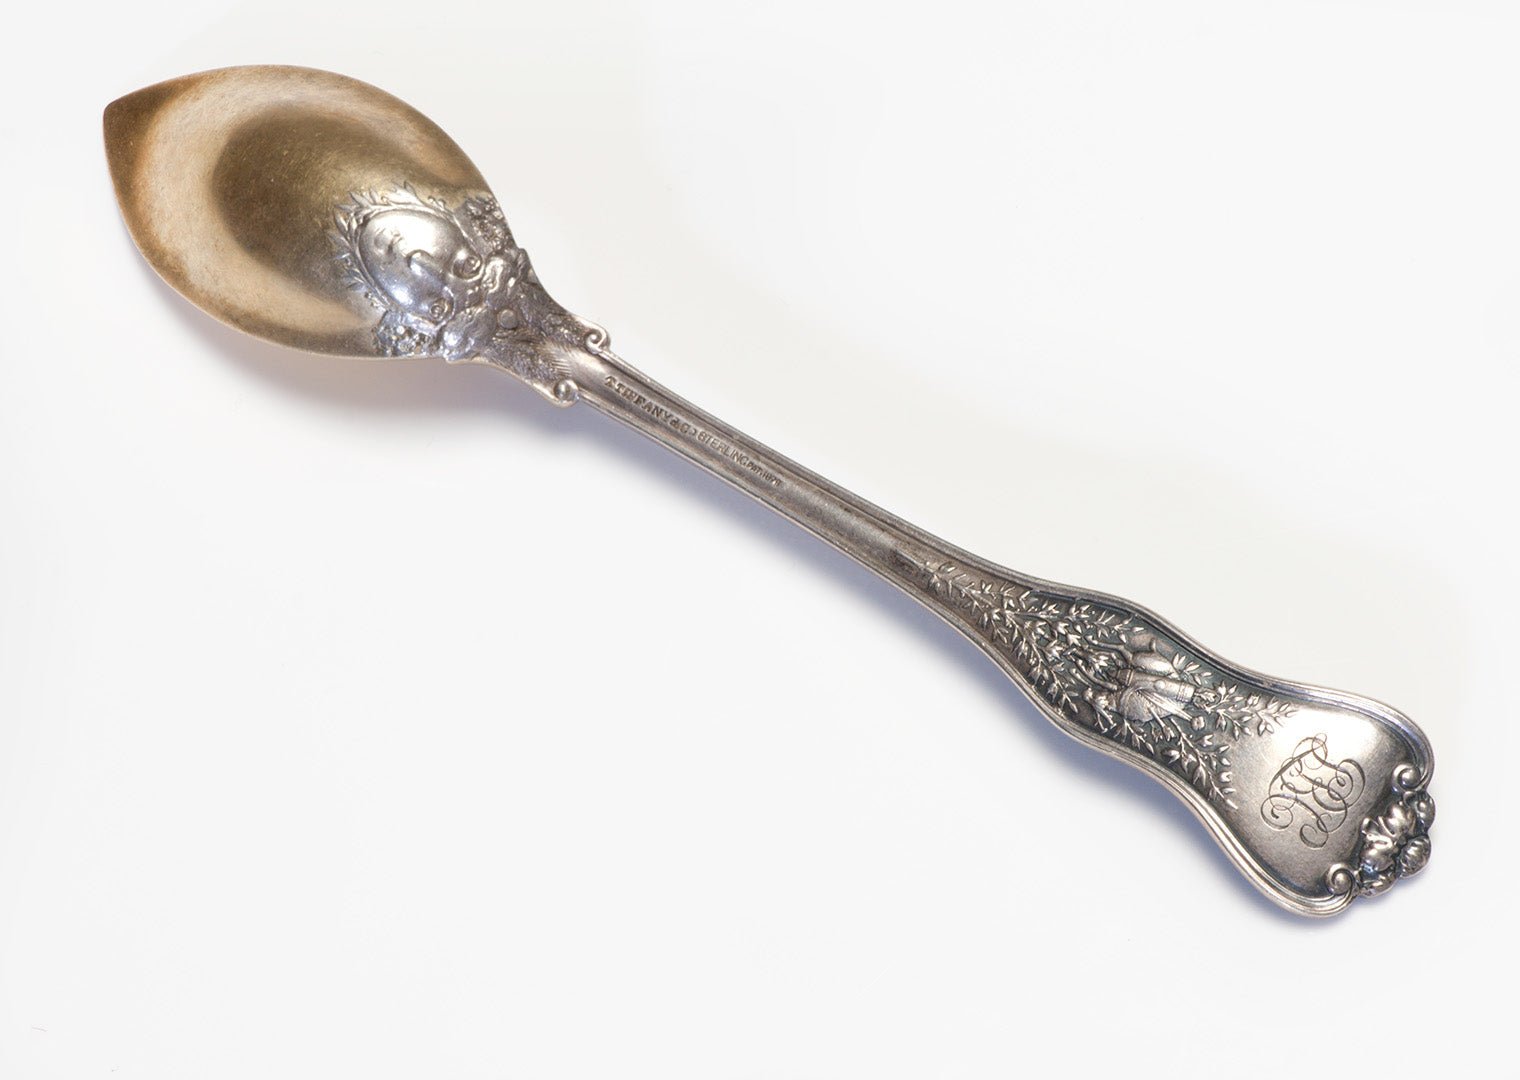 Antique Tiffany & Co. Silver Serving Spoon - DSF Antique Jewelry